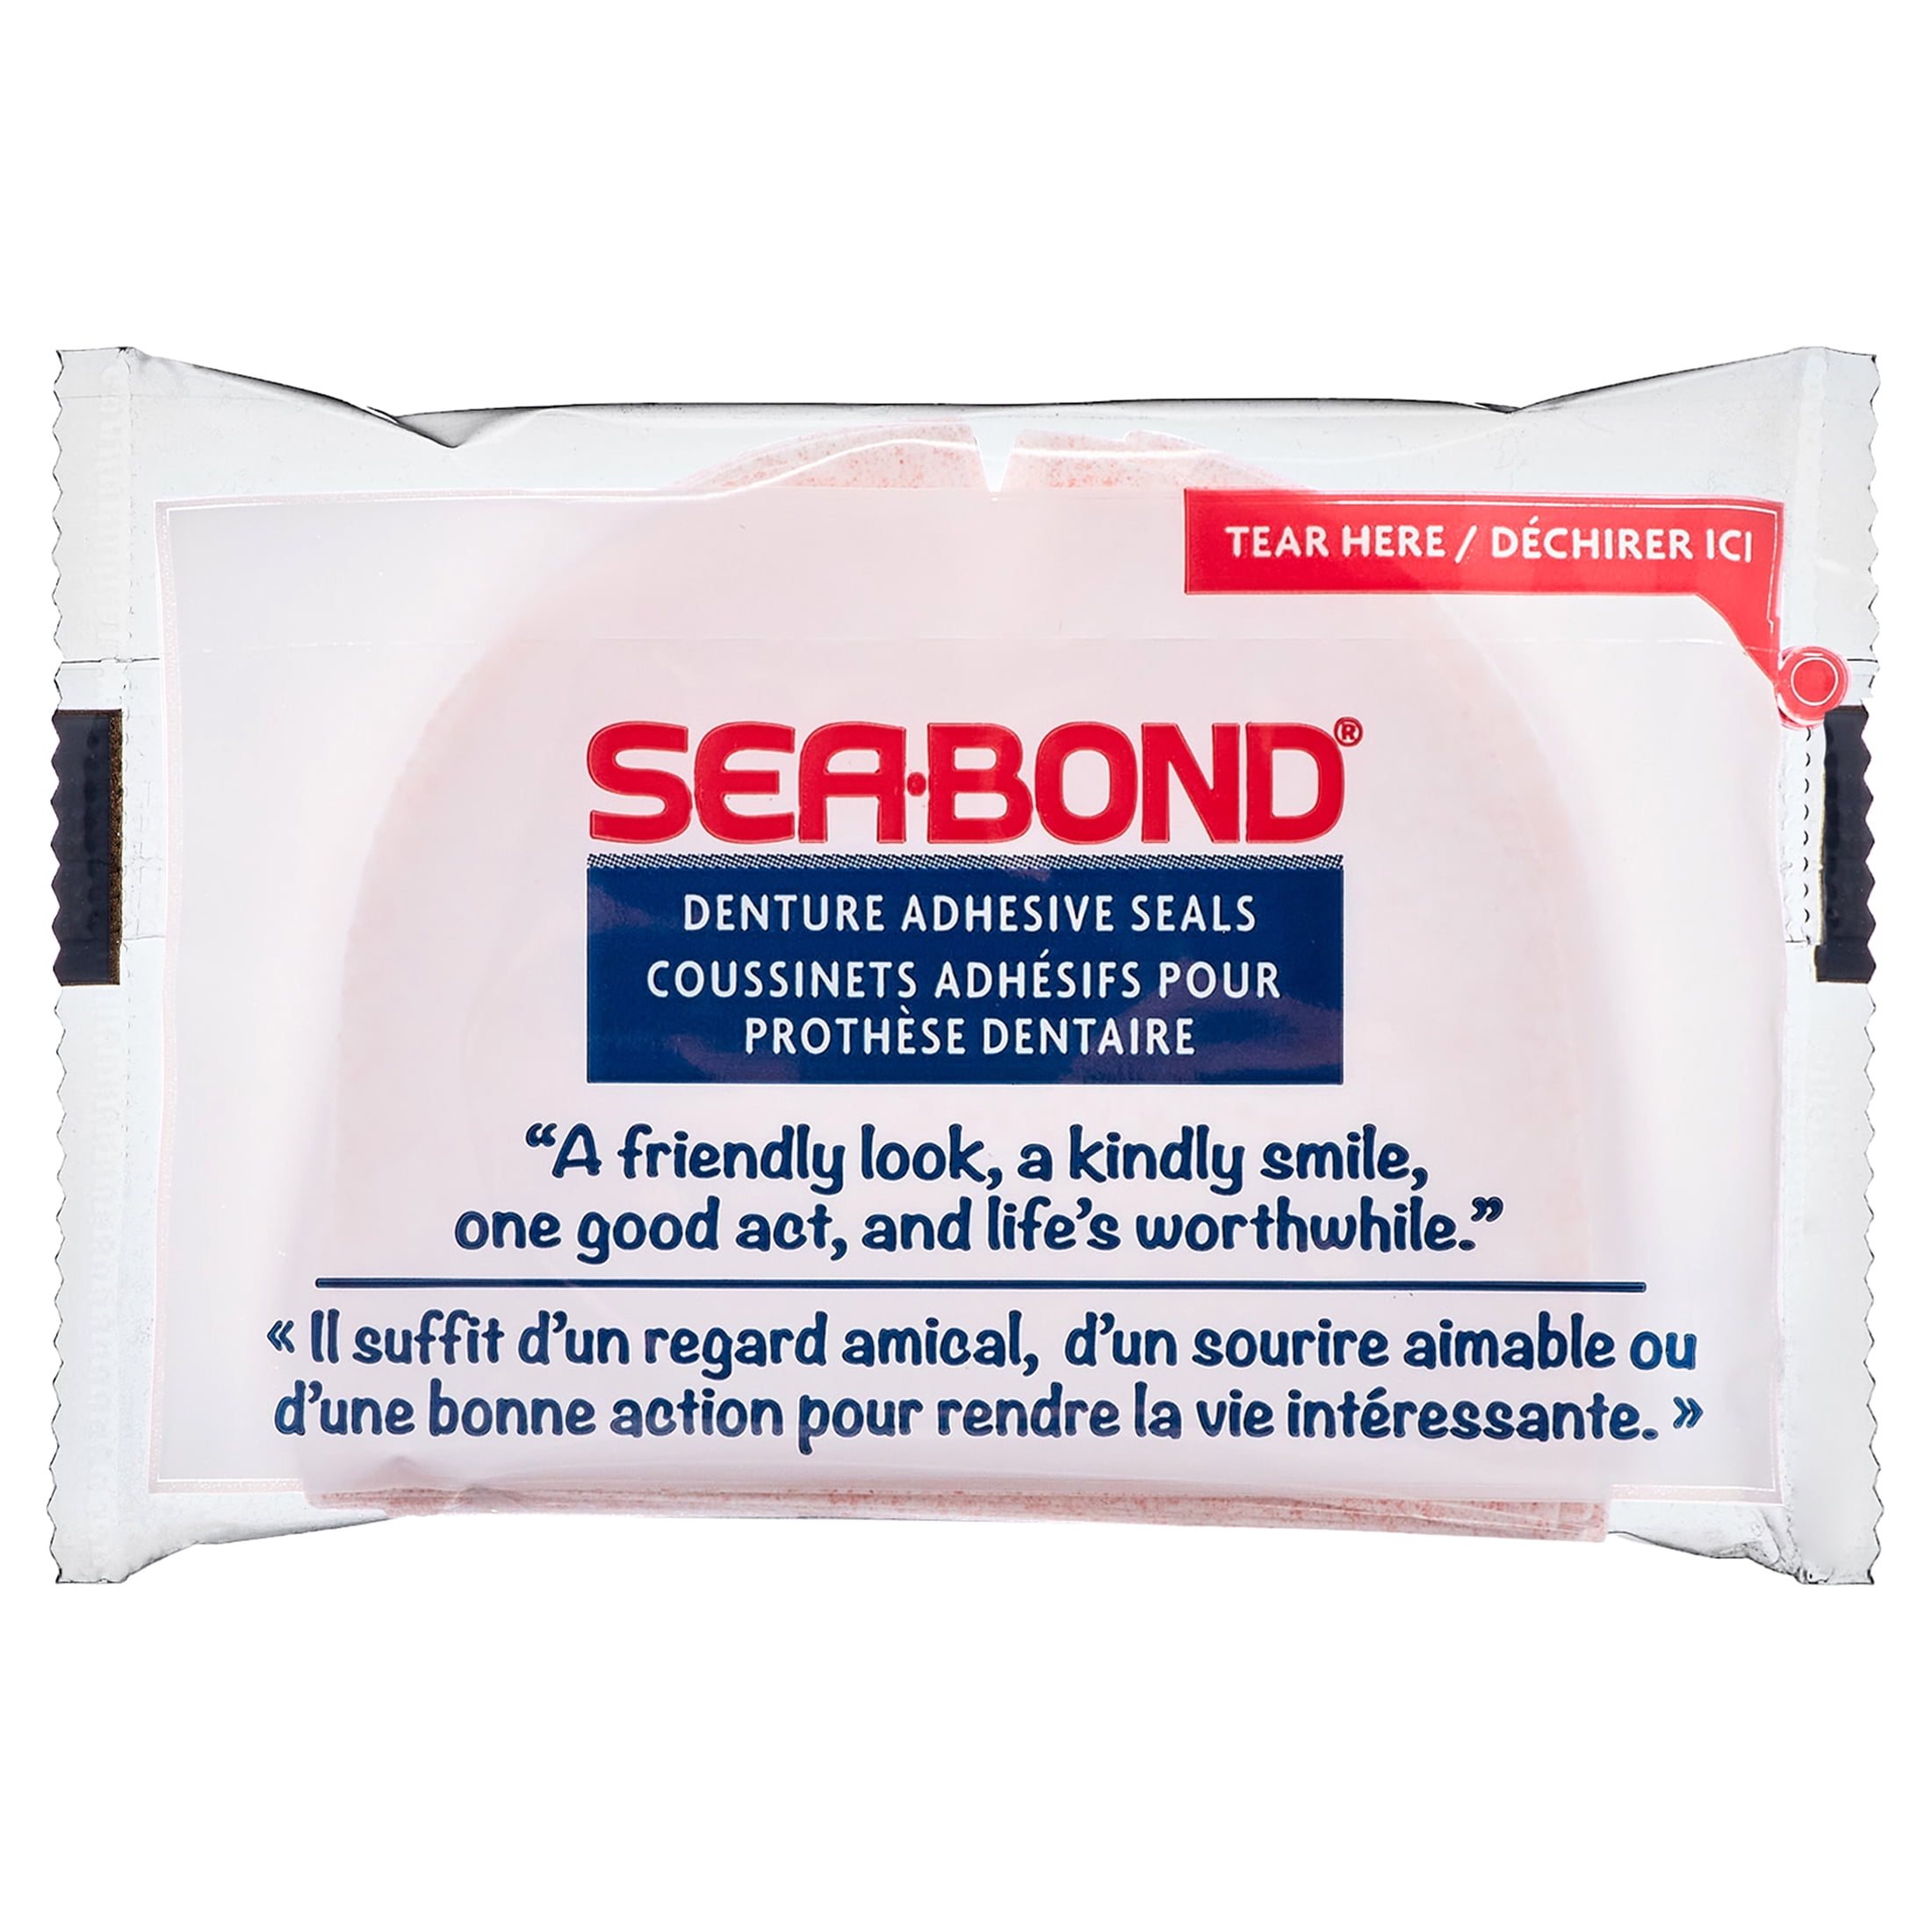 Sea Bond Upper Secure Denture Adhesive Seals, For an All Day Strong Hold,  Fresh Mint Flavor Seals, 30 Count, 4 Pack 